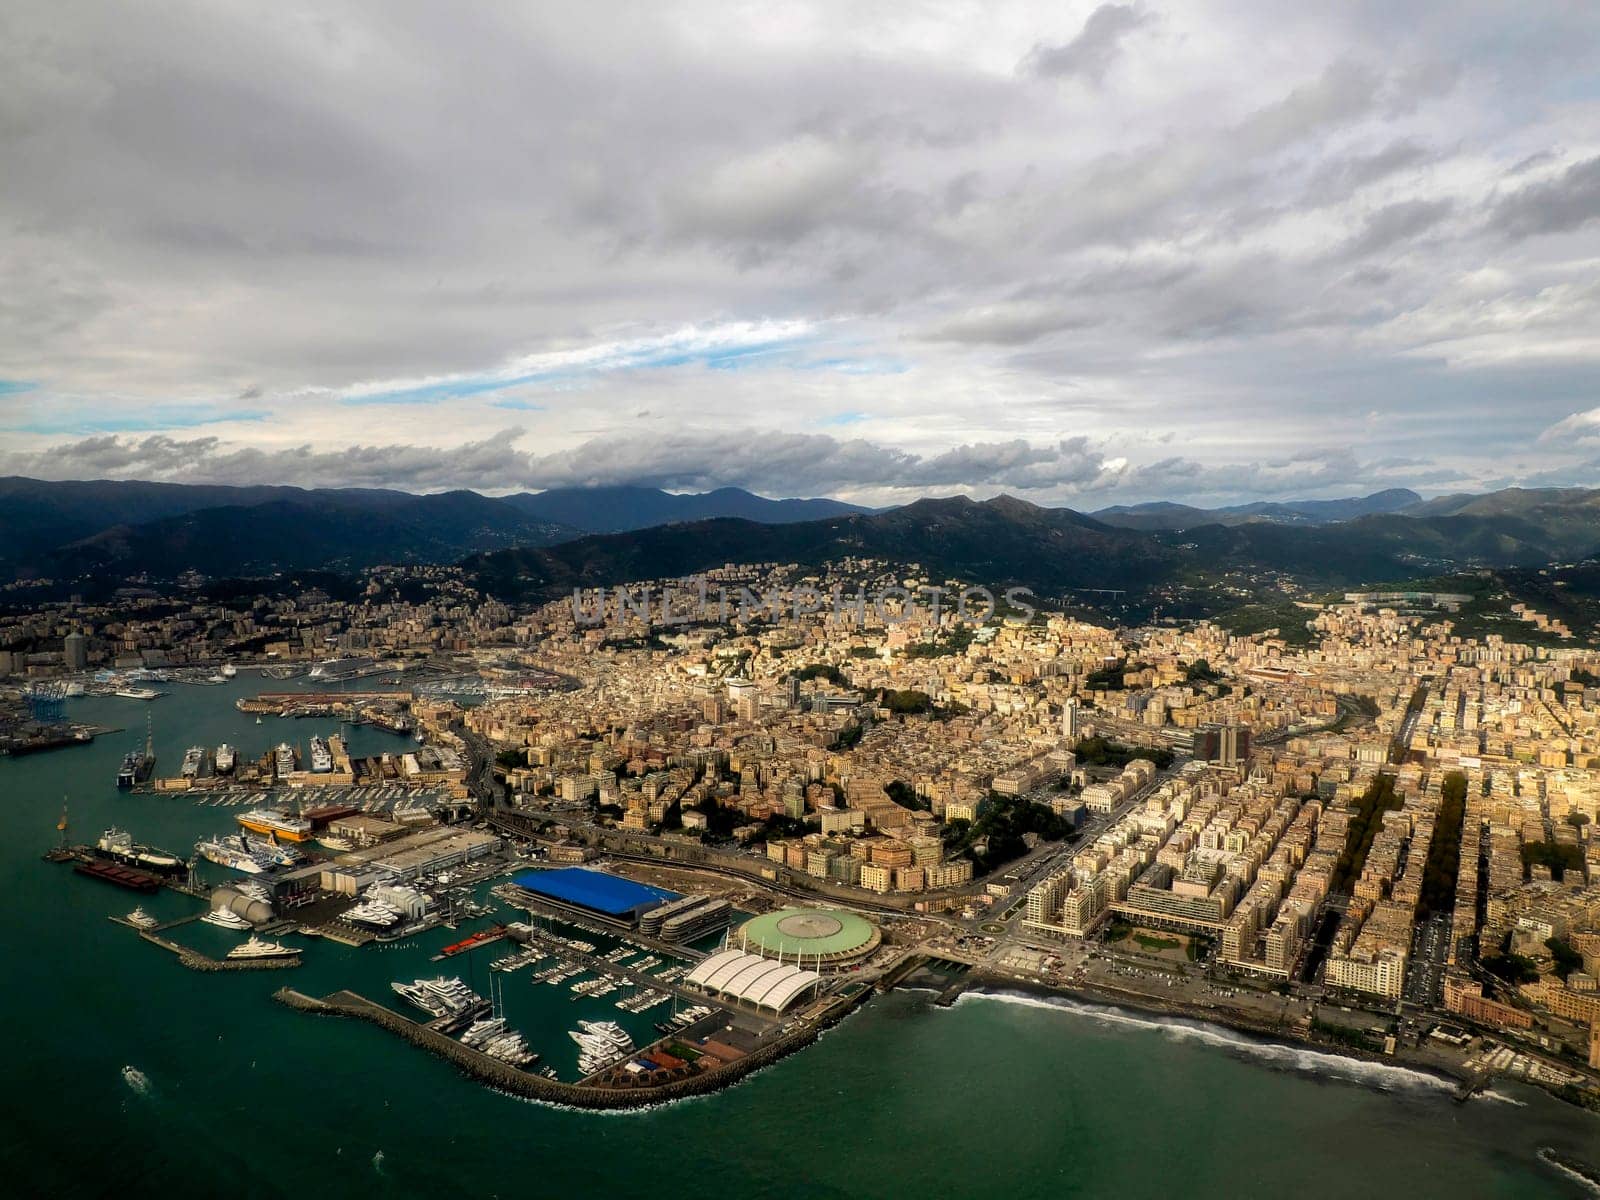 Foce Genoa aerial view before landing to airport by airplane during a sea storm tempest hurricane by AndreaIzzotti